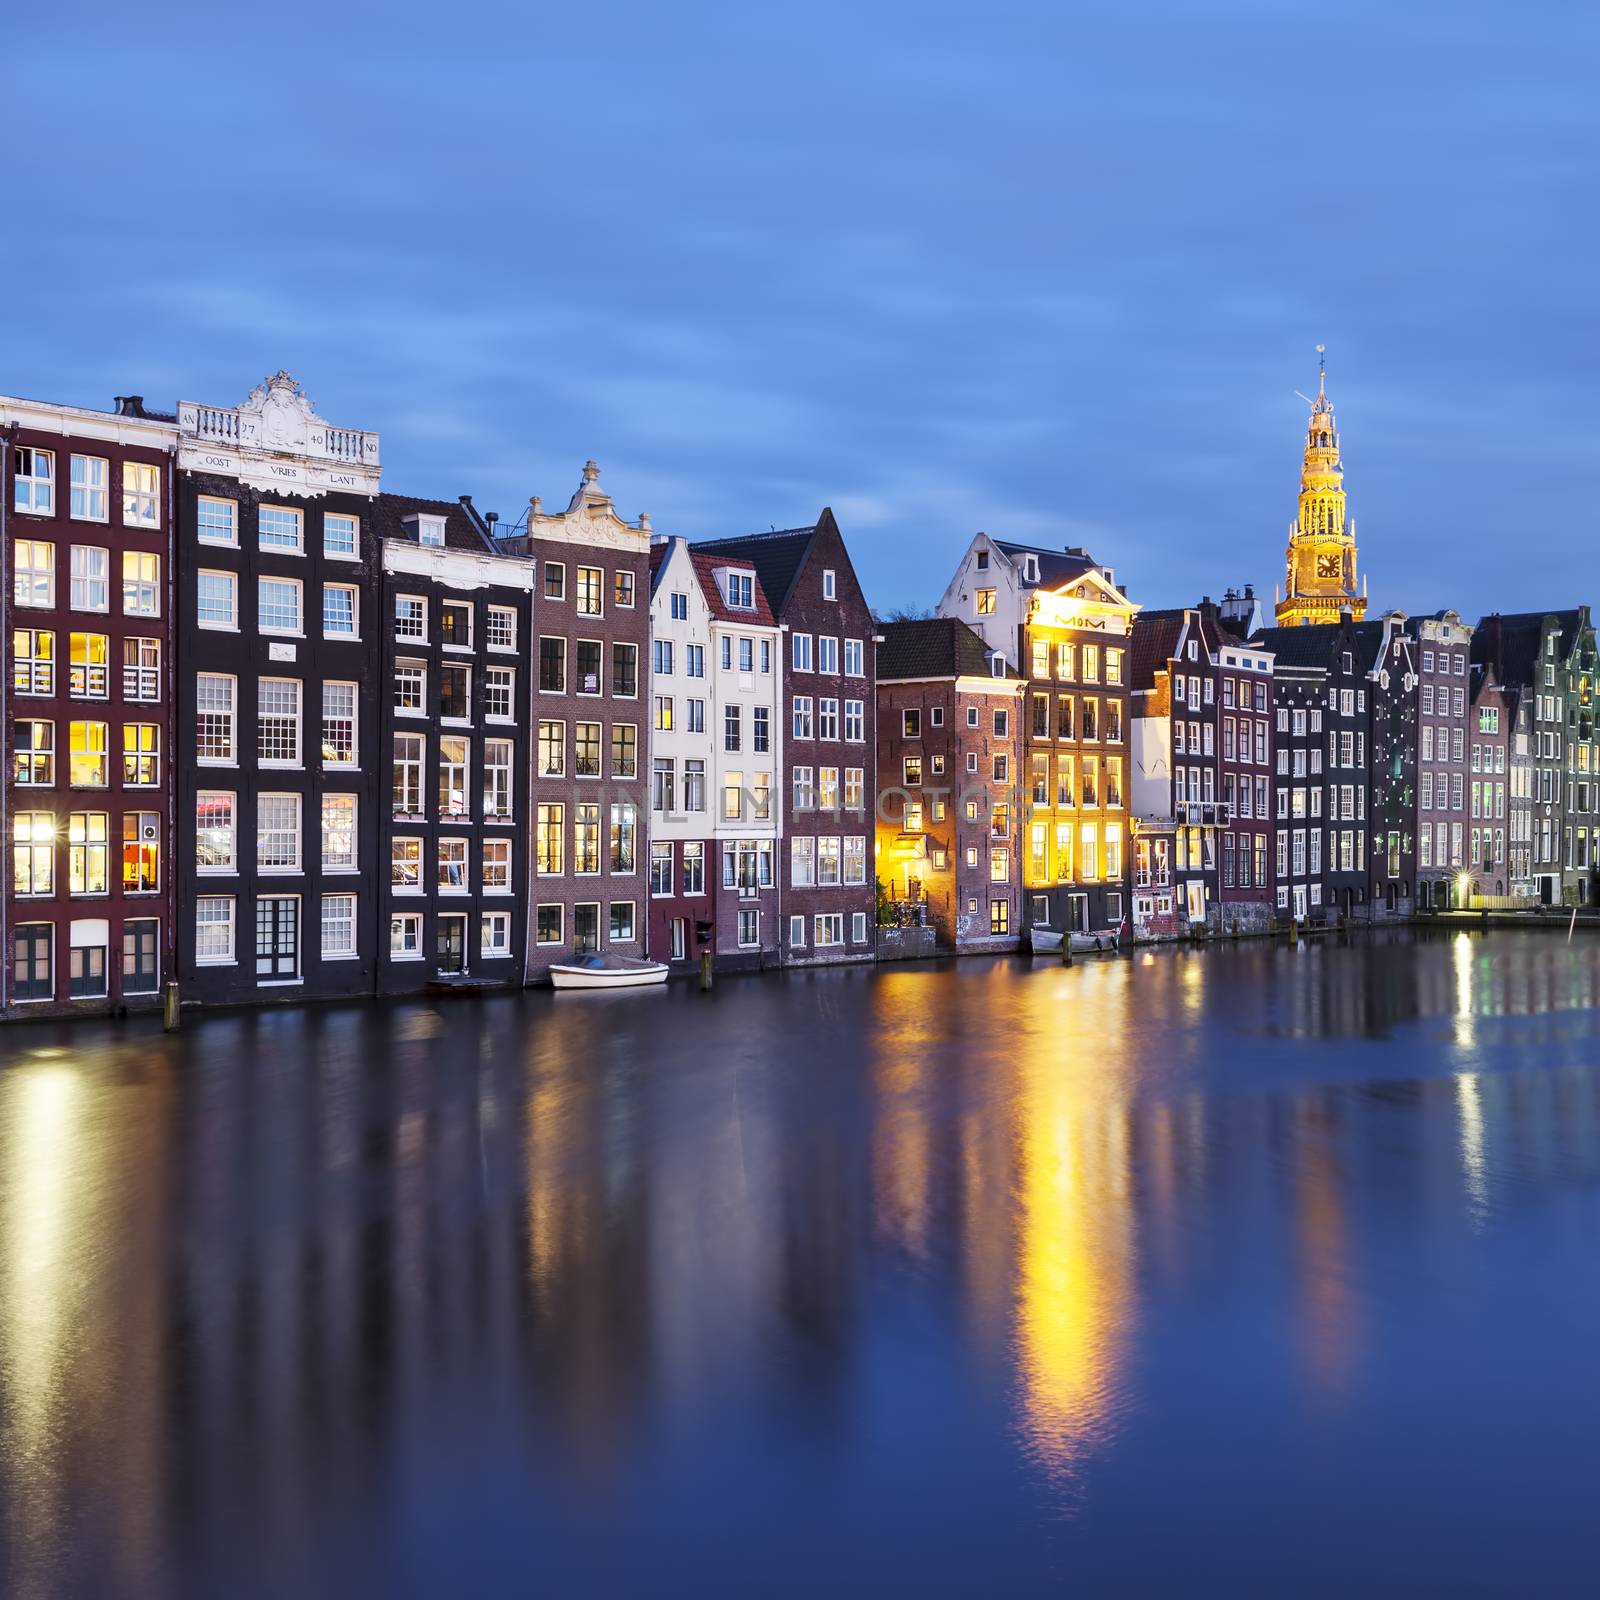 buildings in Amsterdam by night by vwalakte